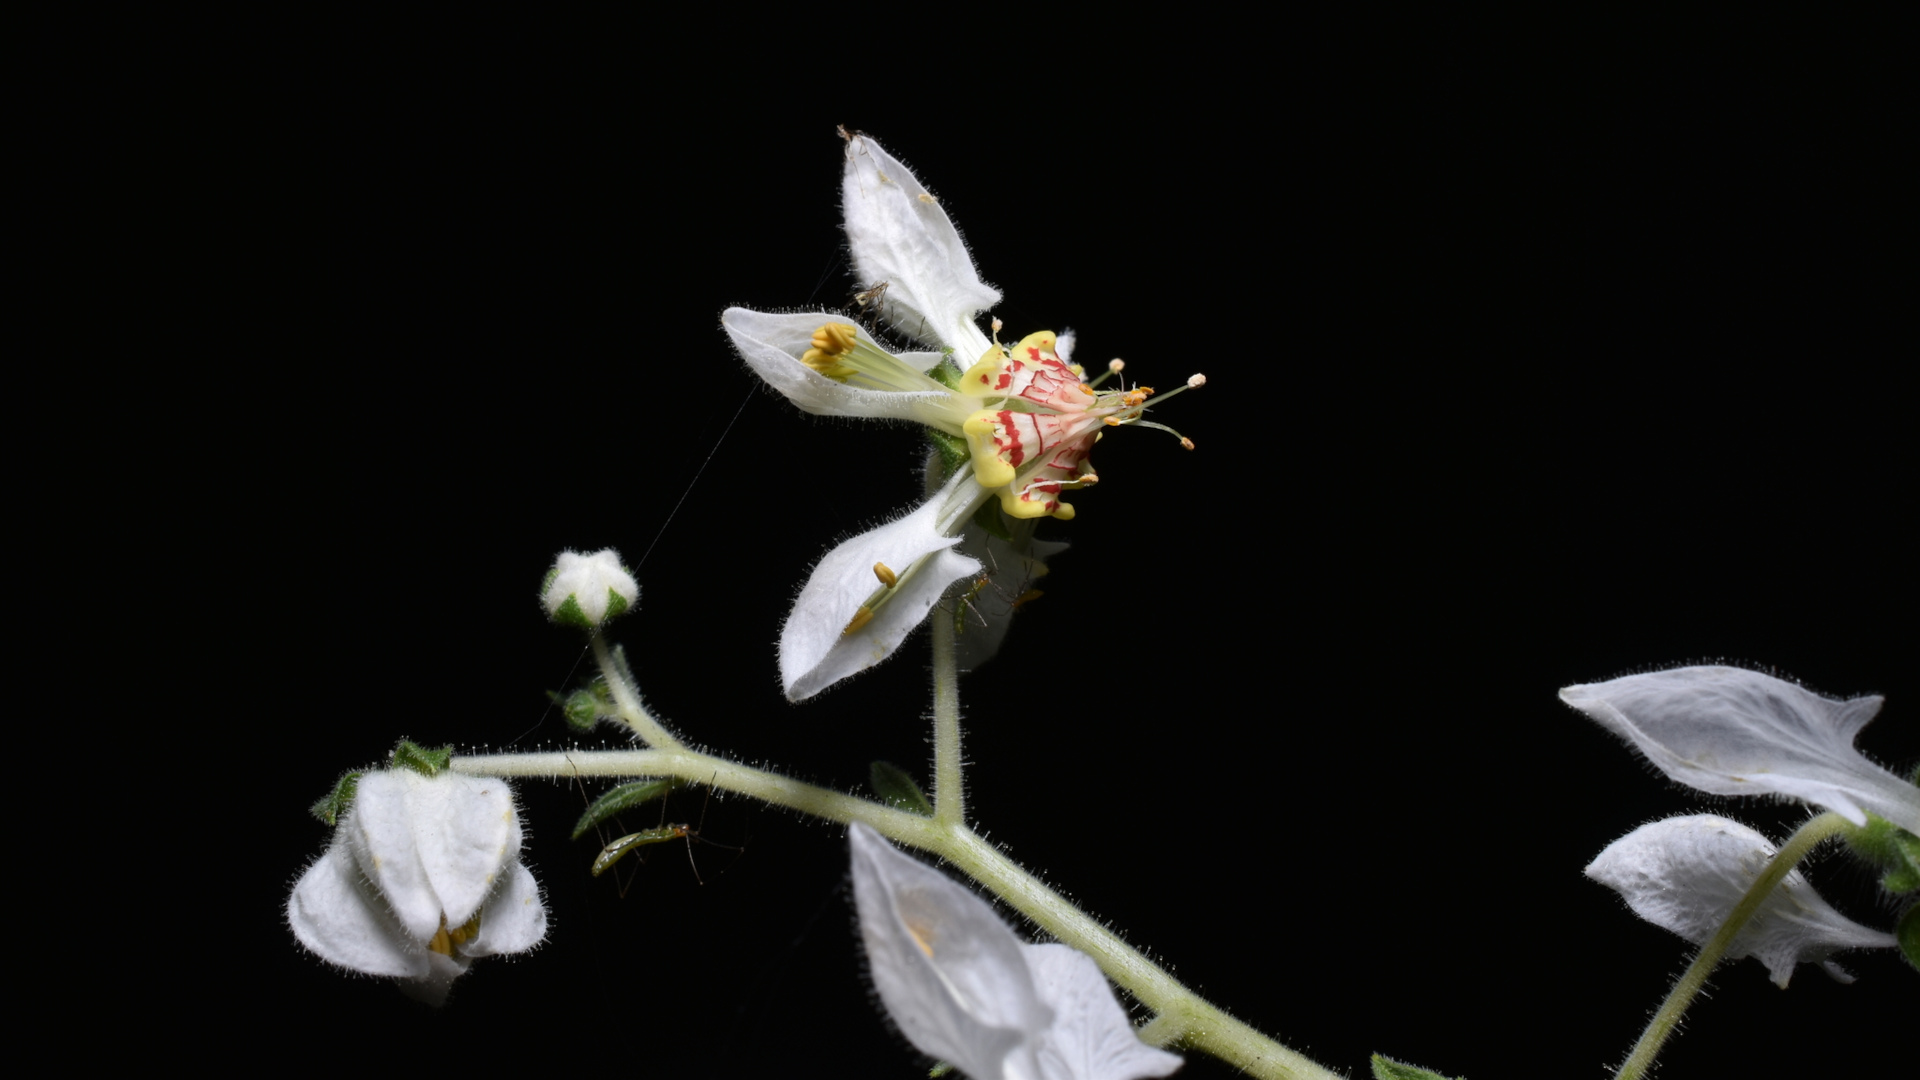 A plant in the nettle family, Nasa poissoniana, can anticipate when a pollinator will visit its flowers, based on past time intervals between visits, and will raise its pollen-bearing stamen.